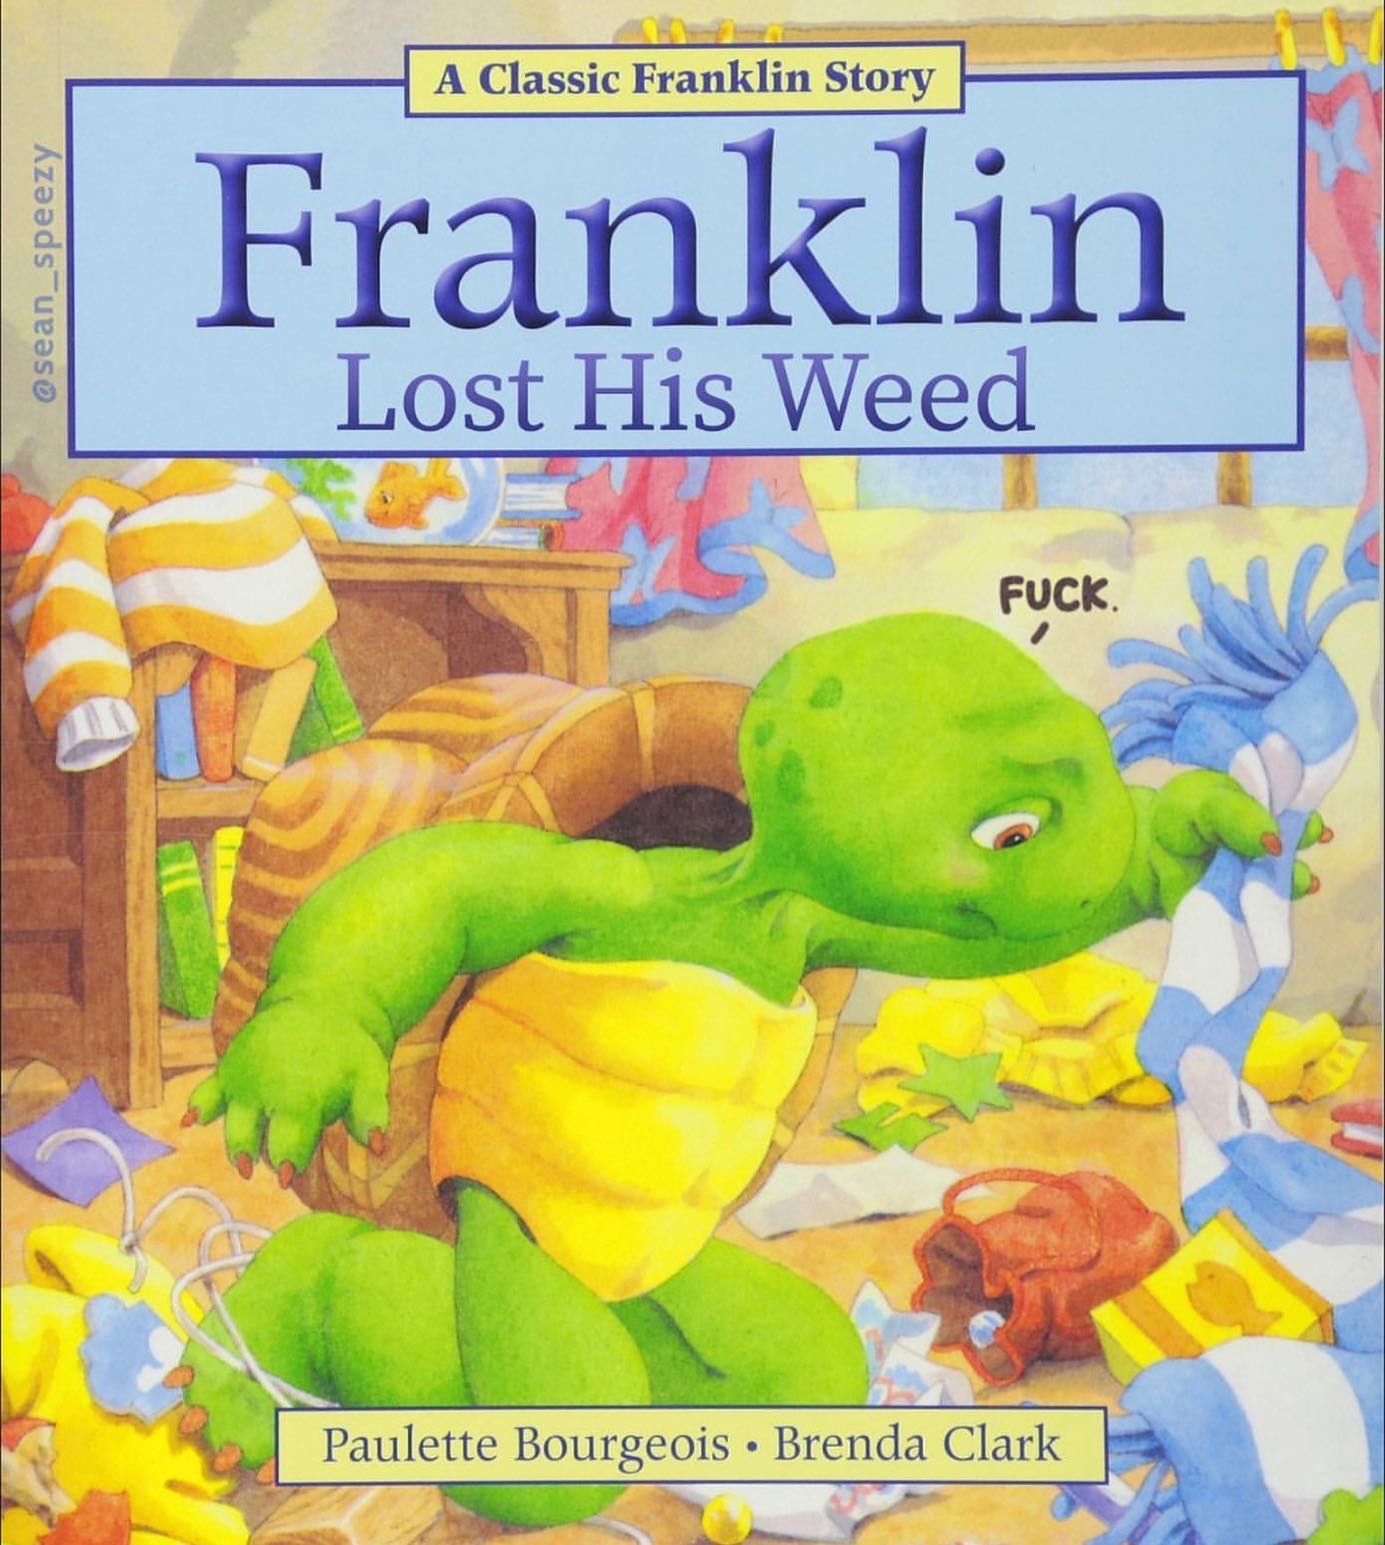 franklin the turtle dank memes - A Classic Franklin Story Franklin Lost His Weed Fuck. Paulette Bourgeois Brenda Clark